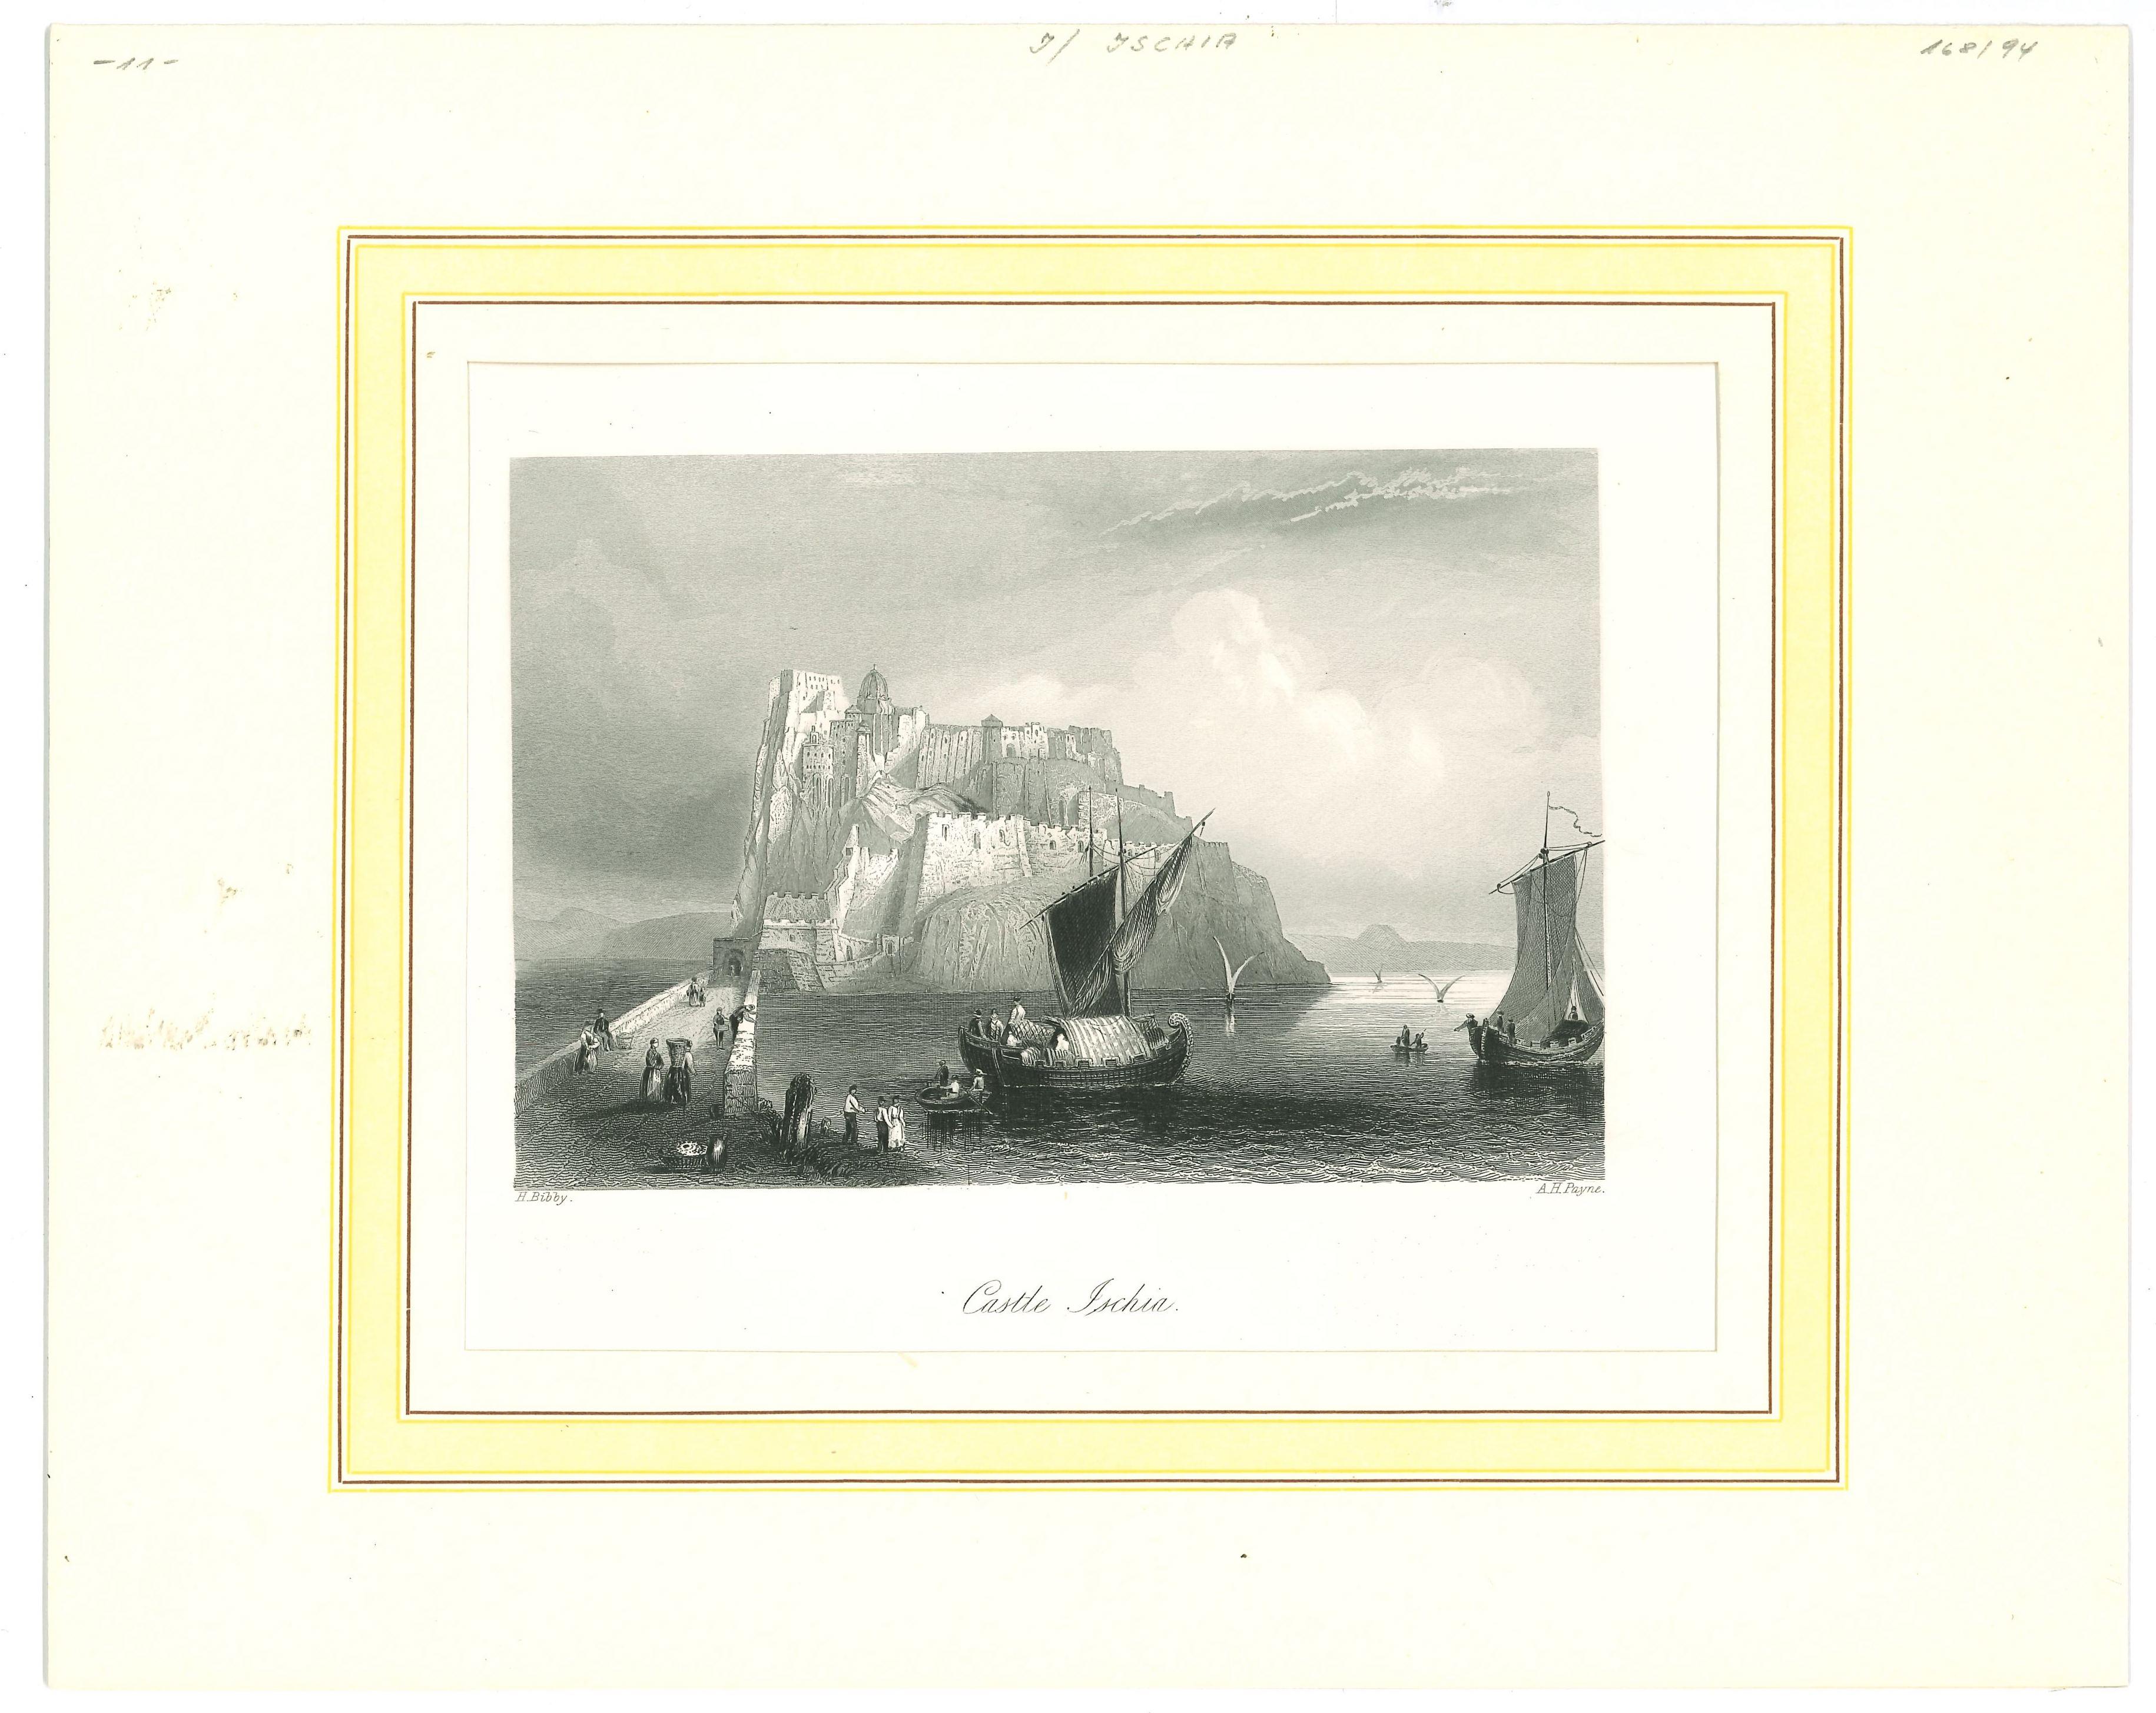 Unknown Landscape Print - Ancient View of Castle Ischia - Original Lithograph on Paper - Mid-19th Century